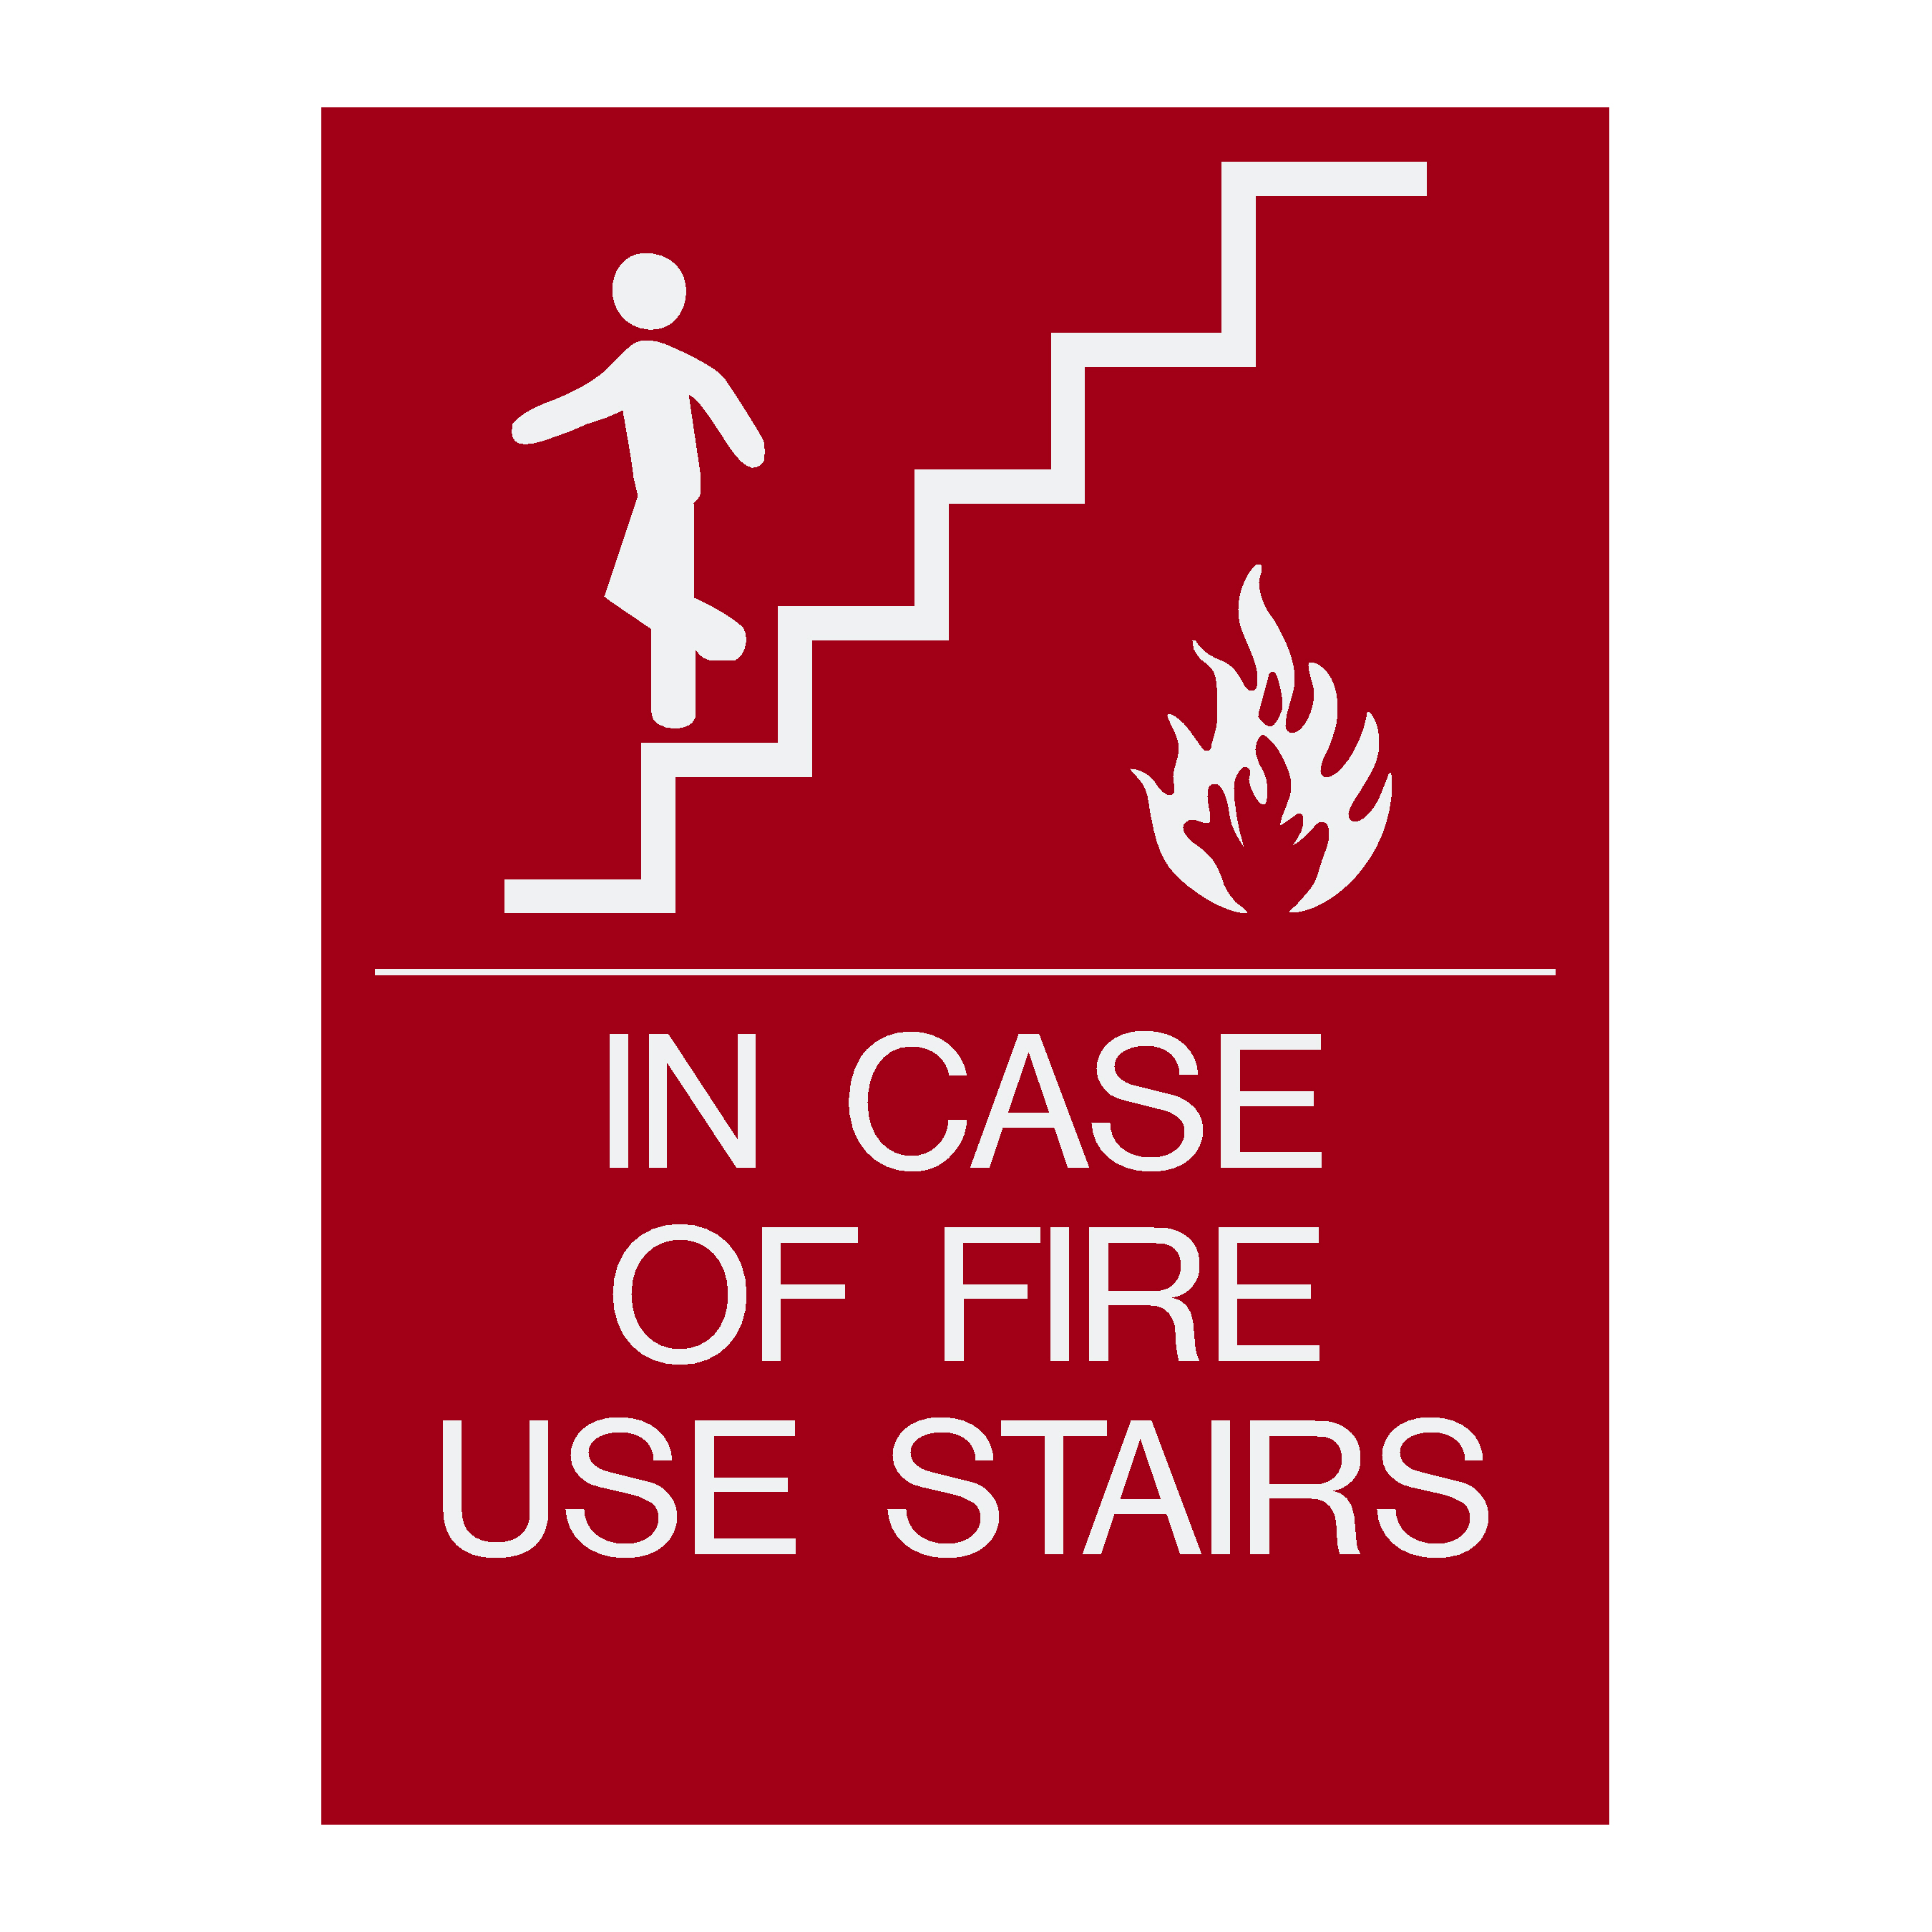 In case of fire use stairs -ADA Red sign white copy